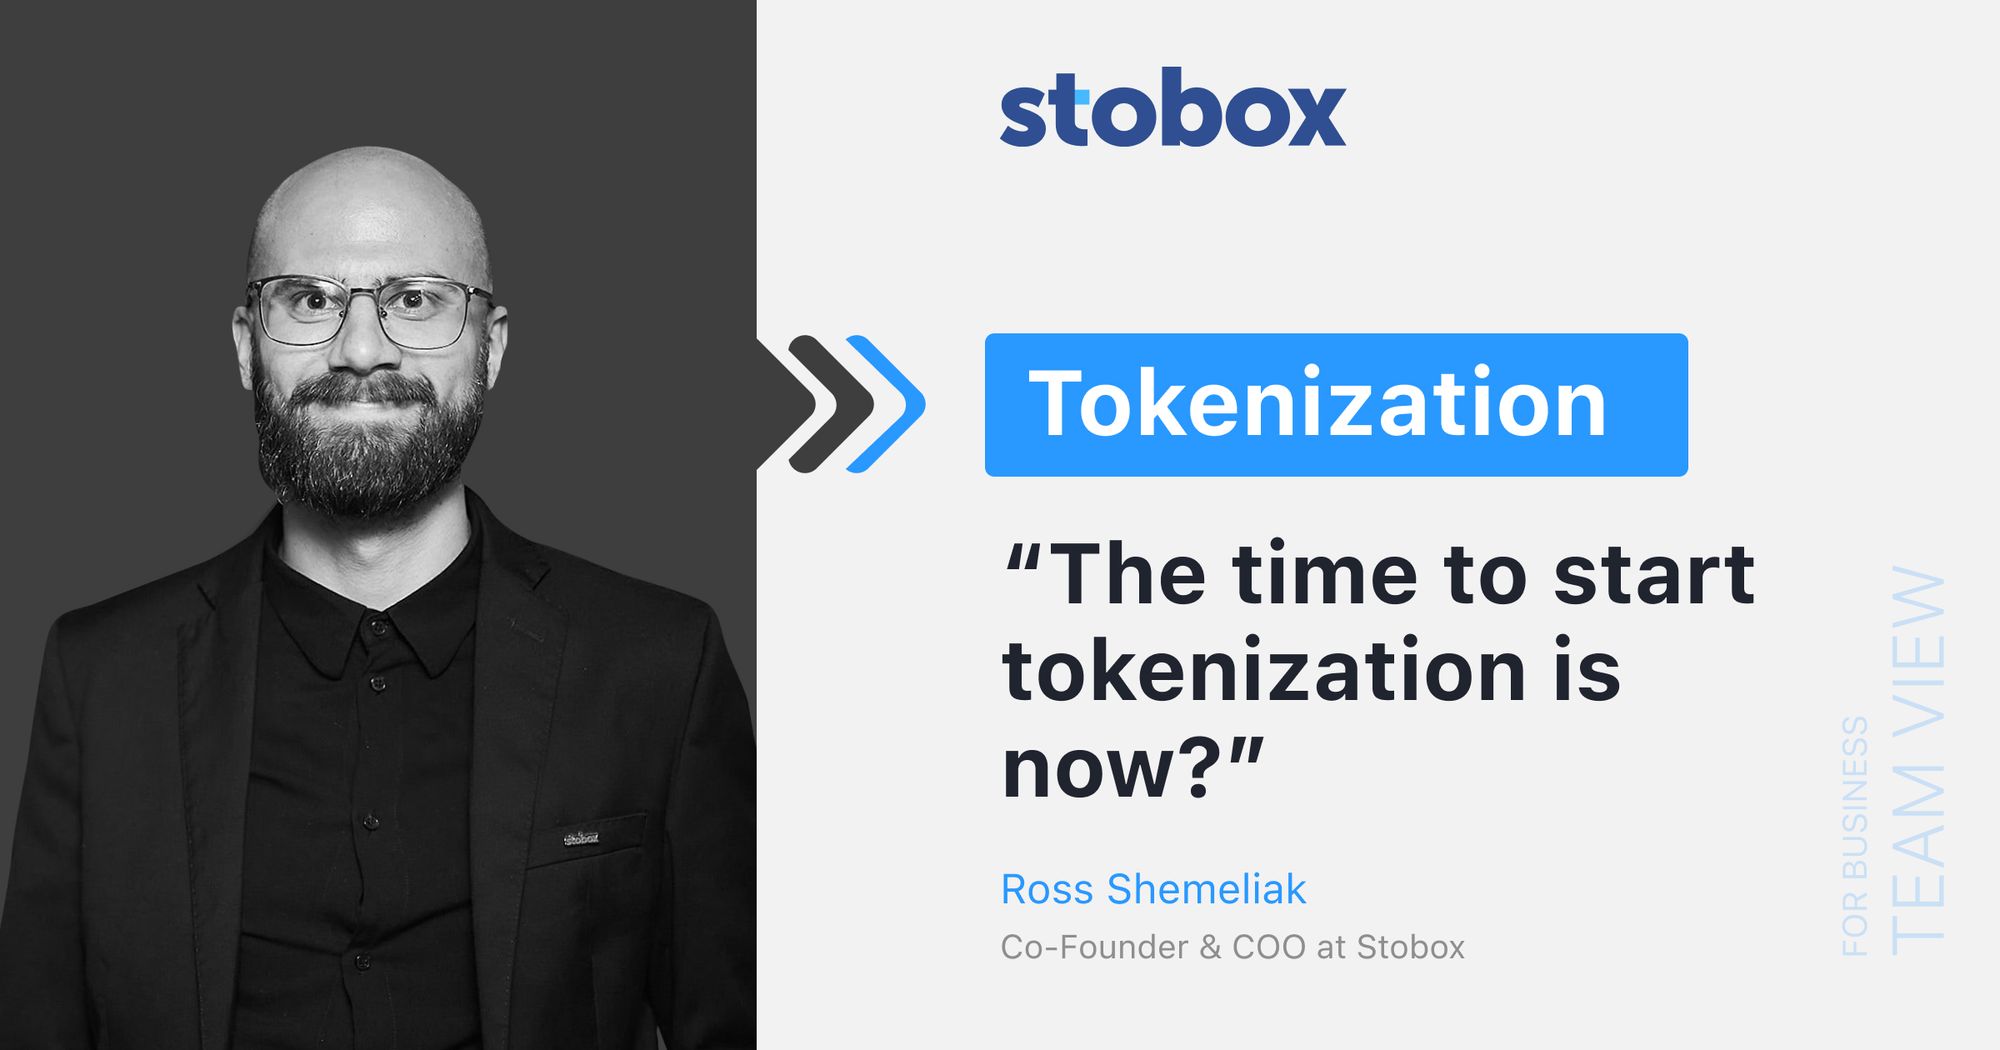 Why the best time to conduct tokenization is now?